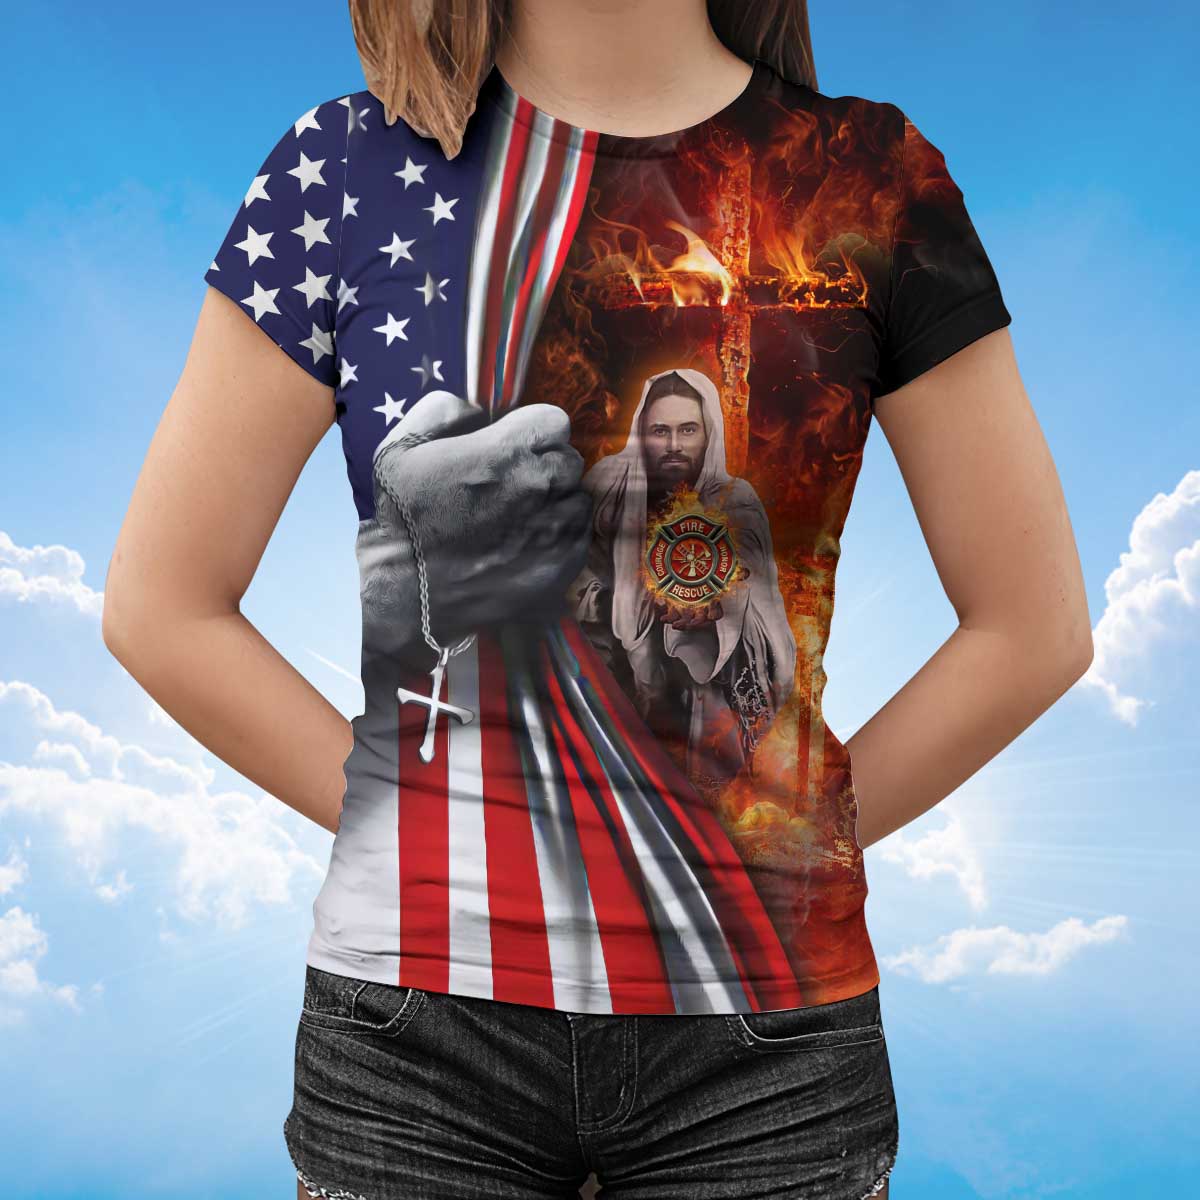 Jesus In The Flames T Shirt Patriot Gift Memorial 11 September Shirts